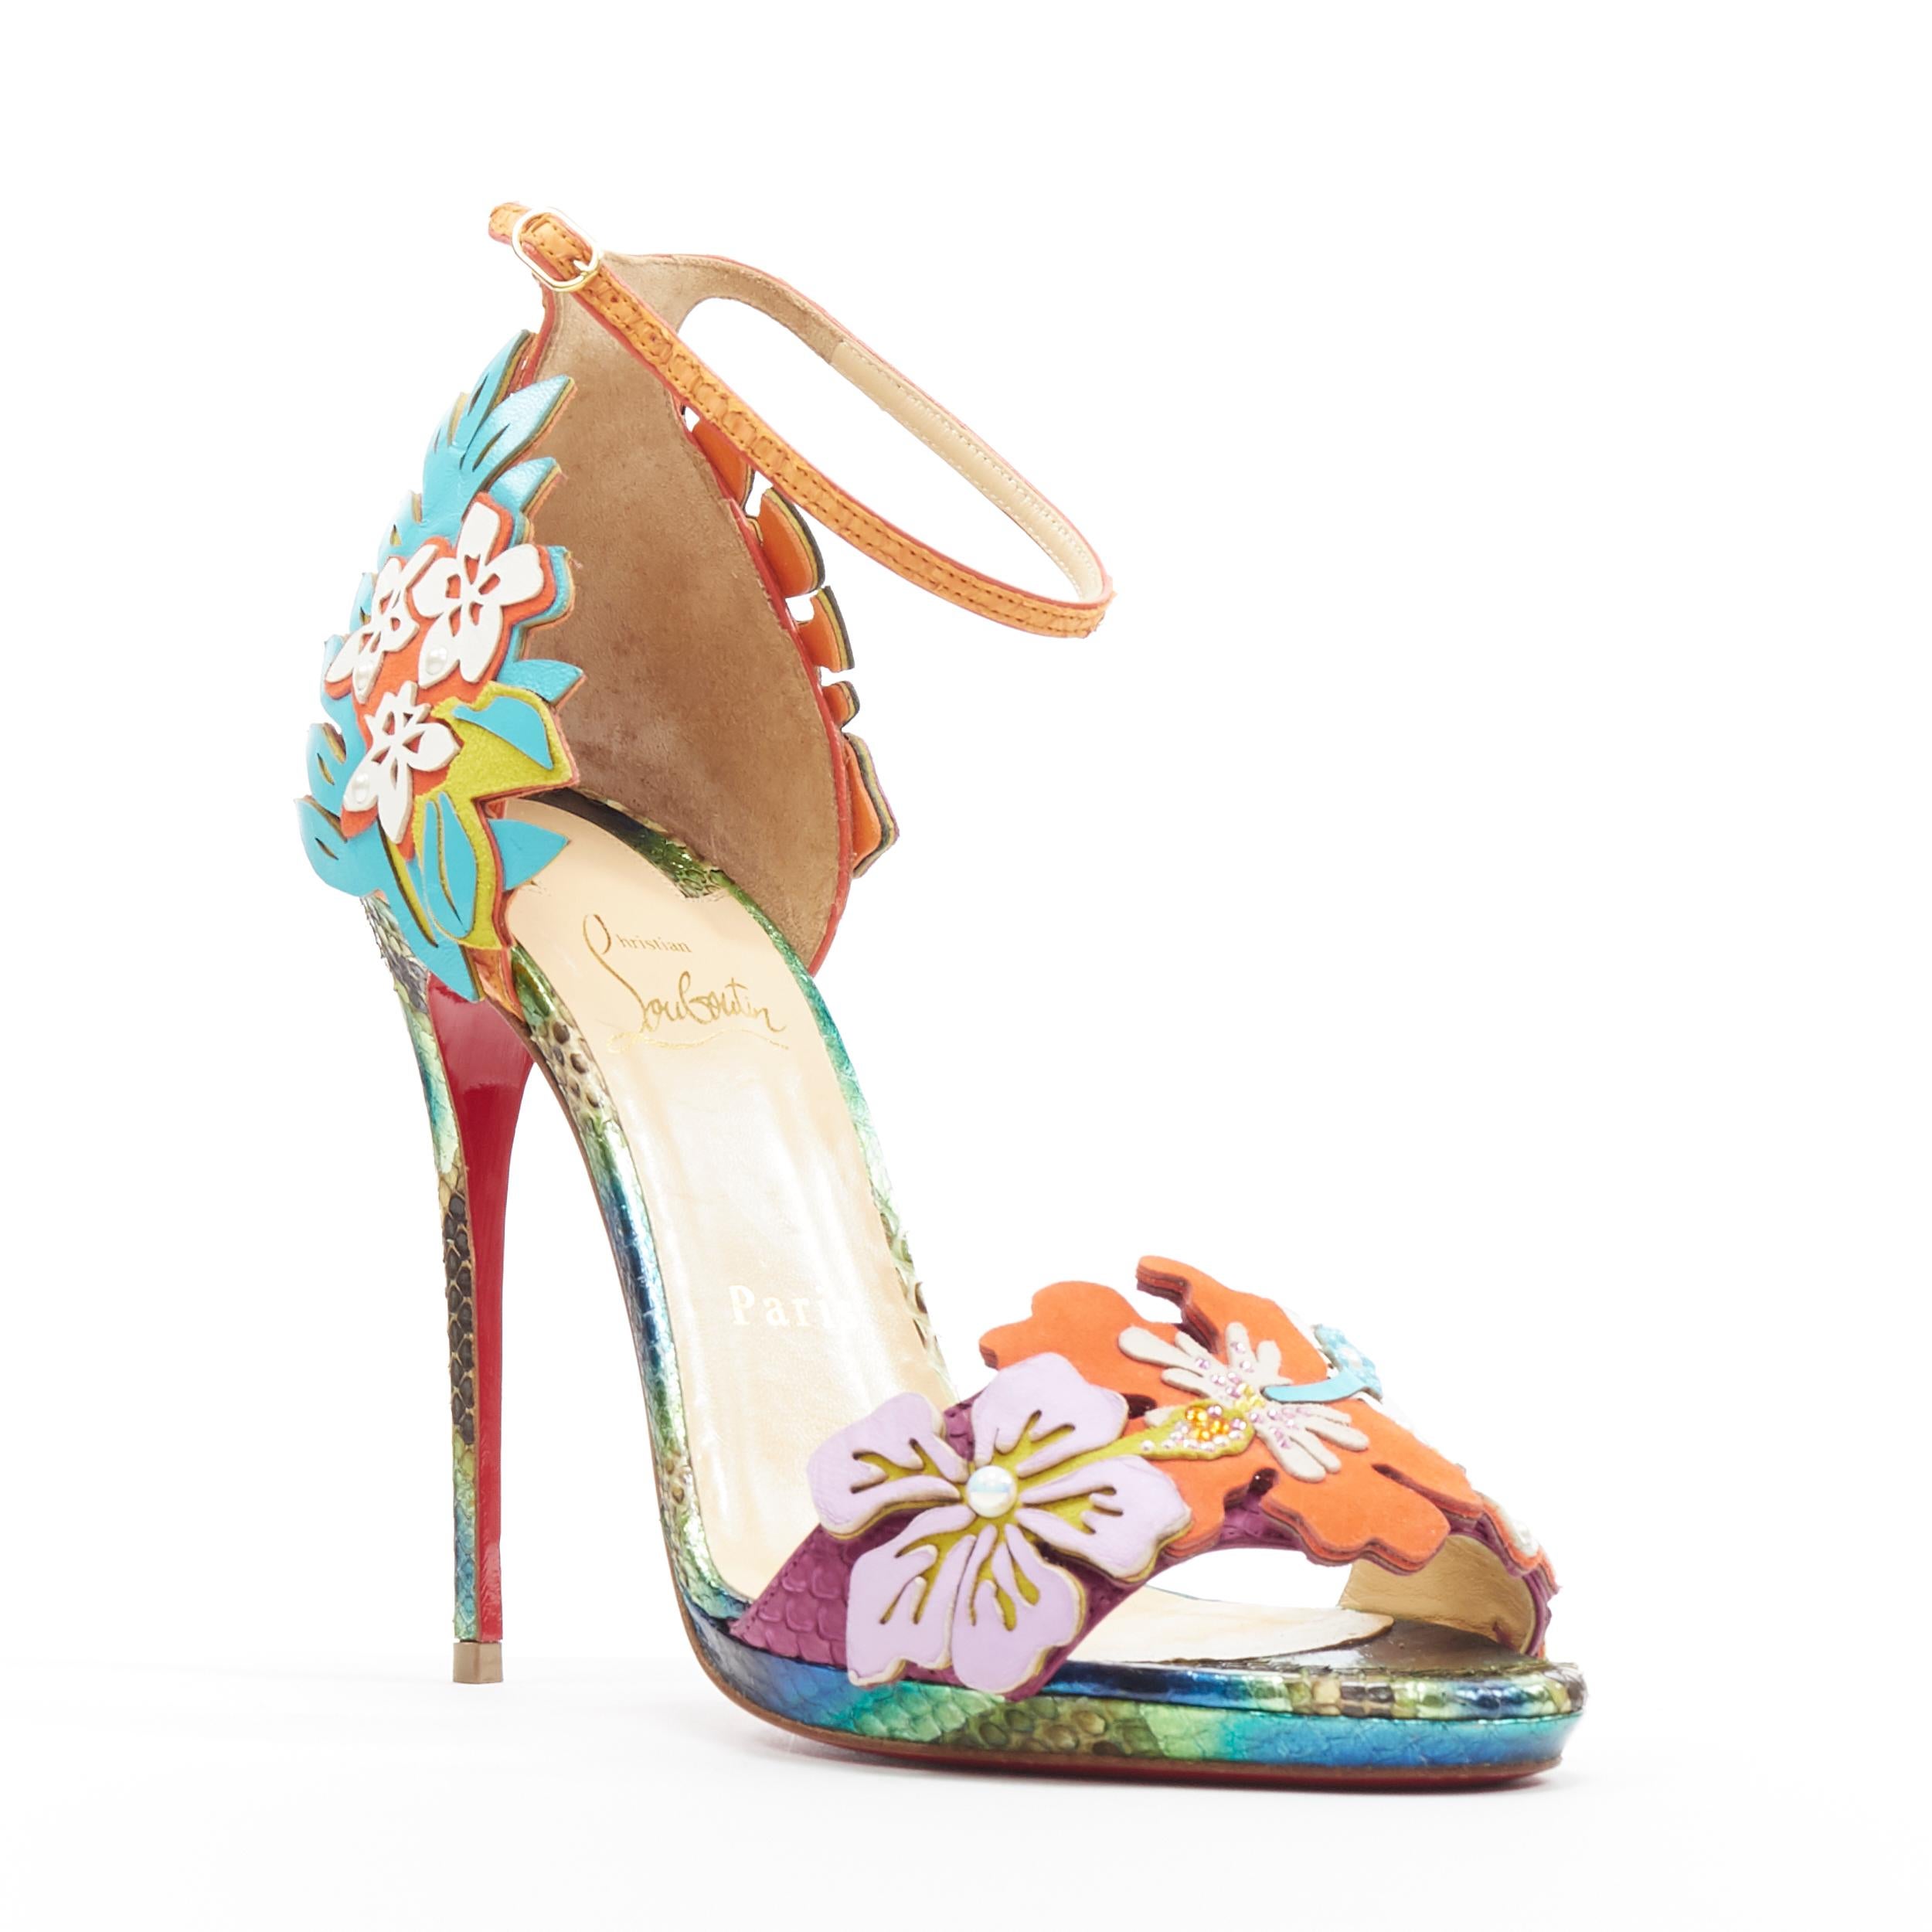 CHRISTIAN LOUBOUTIN Ha Why Luna 120 floral pearl strass ankle strap heel EU38
Brand: Christian Louboutin
Designer: Christian Louboutin
Model Name / Style: Ha Why Luna 120
Material: Leather
Color: Multicolour
Pattern: Floral
Closure: Ankle